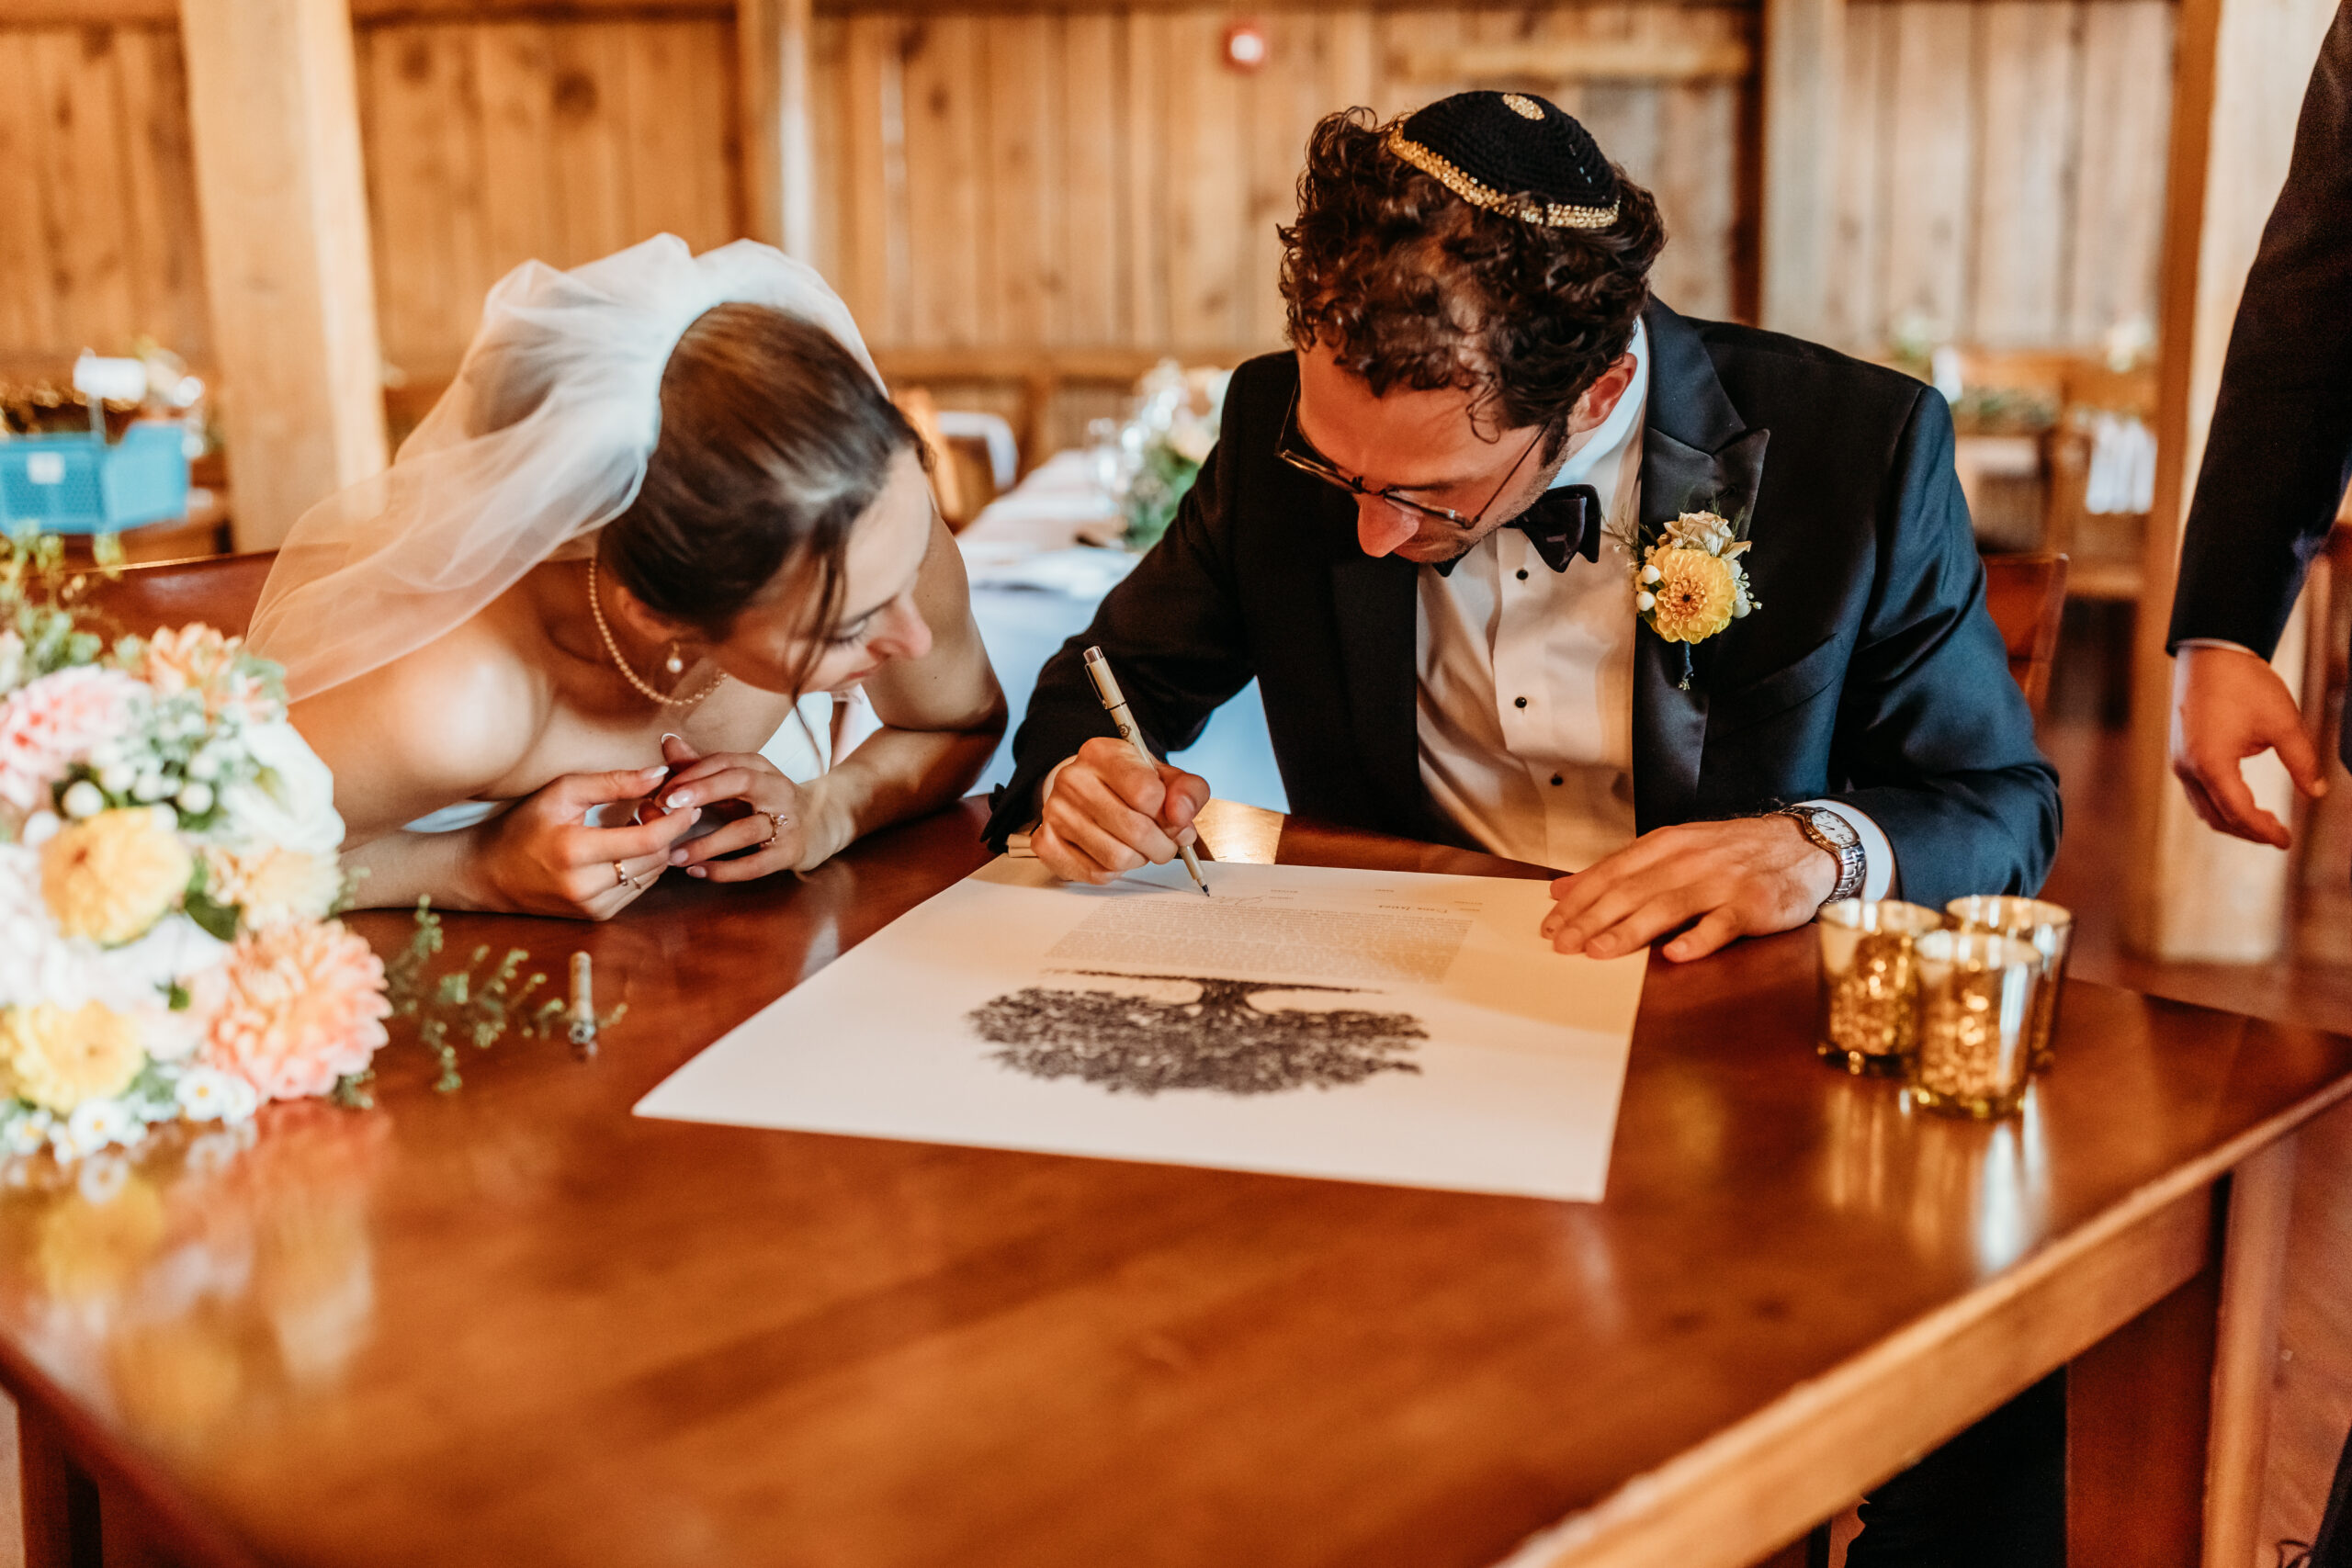 The groom signing the ketubah next to his wife